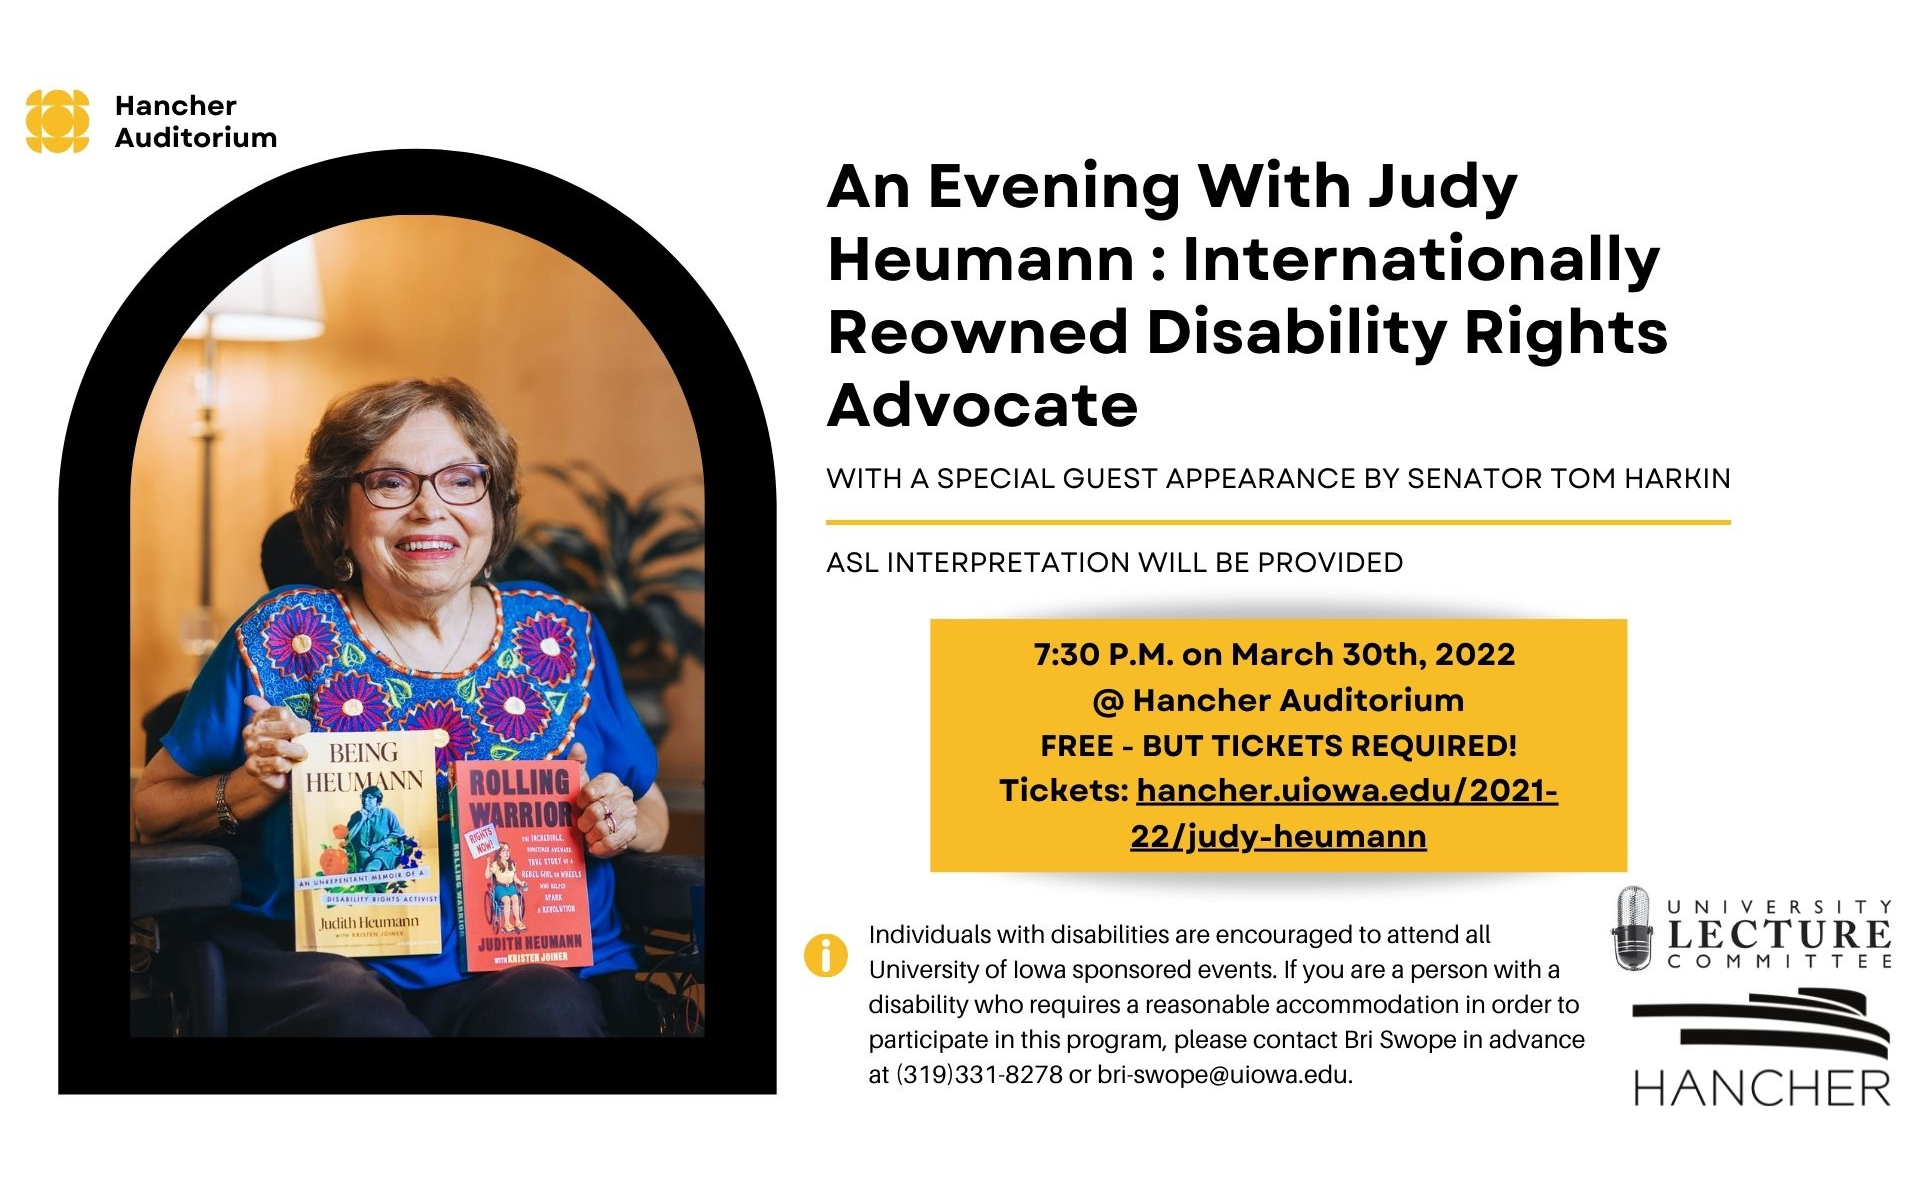 An evening with Judy Heumann, an author, activist, central figure in the documentary “Crip Camp,” and internationally known civil rights advocate